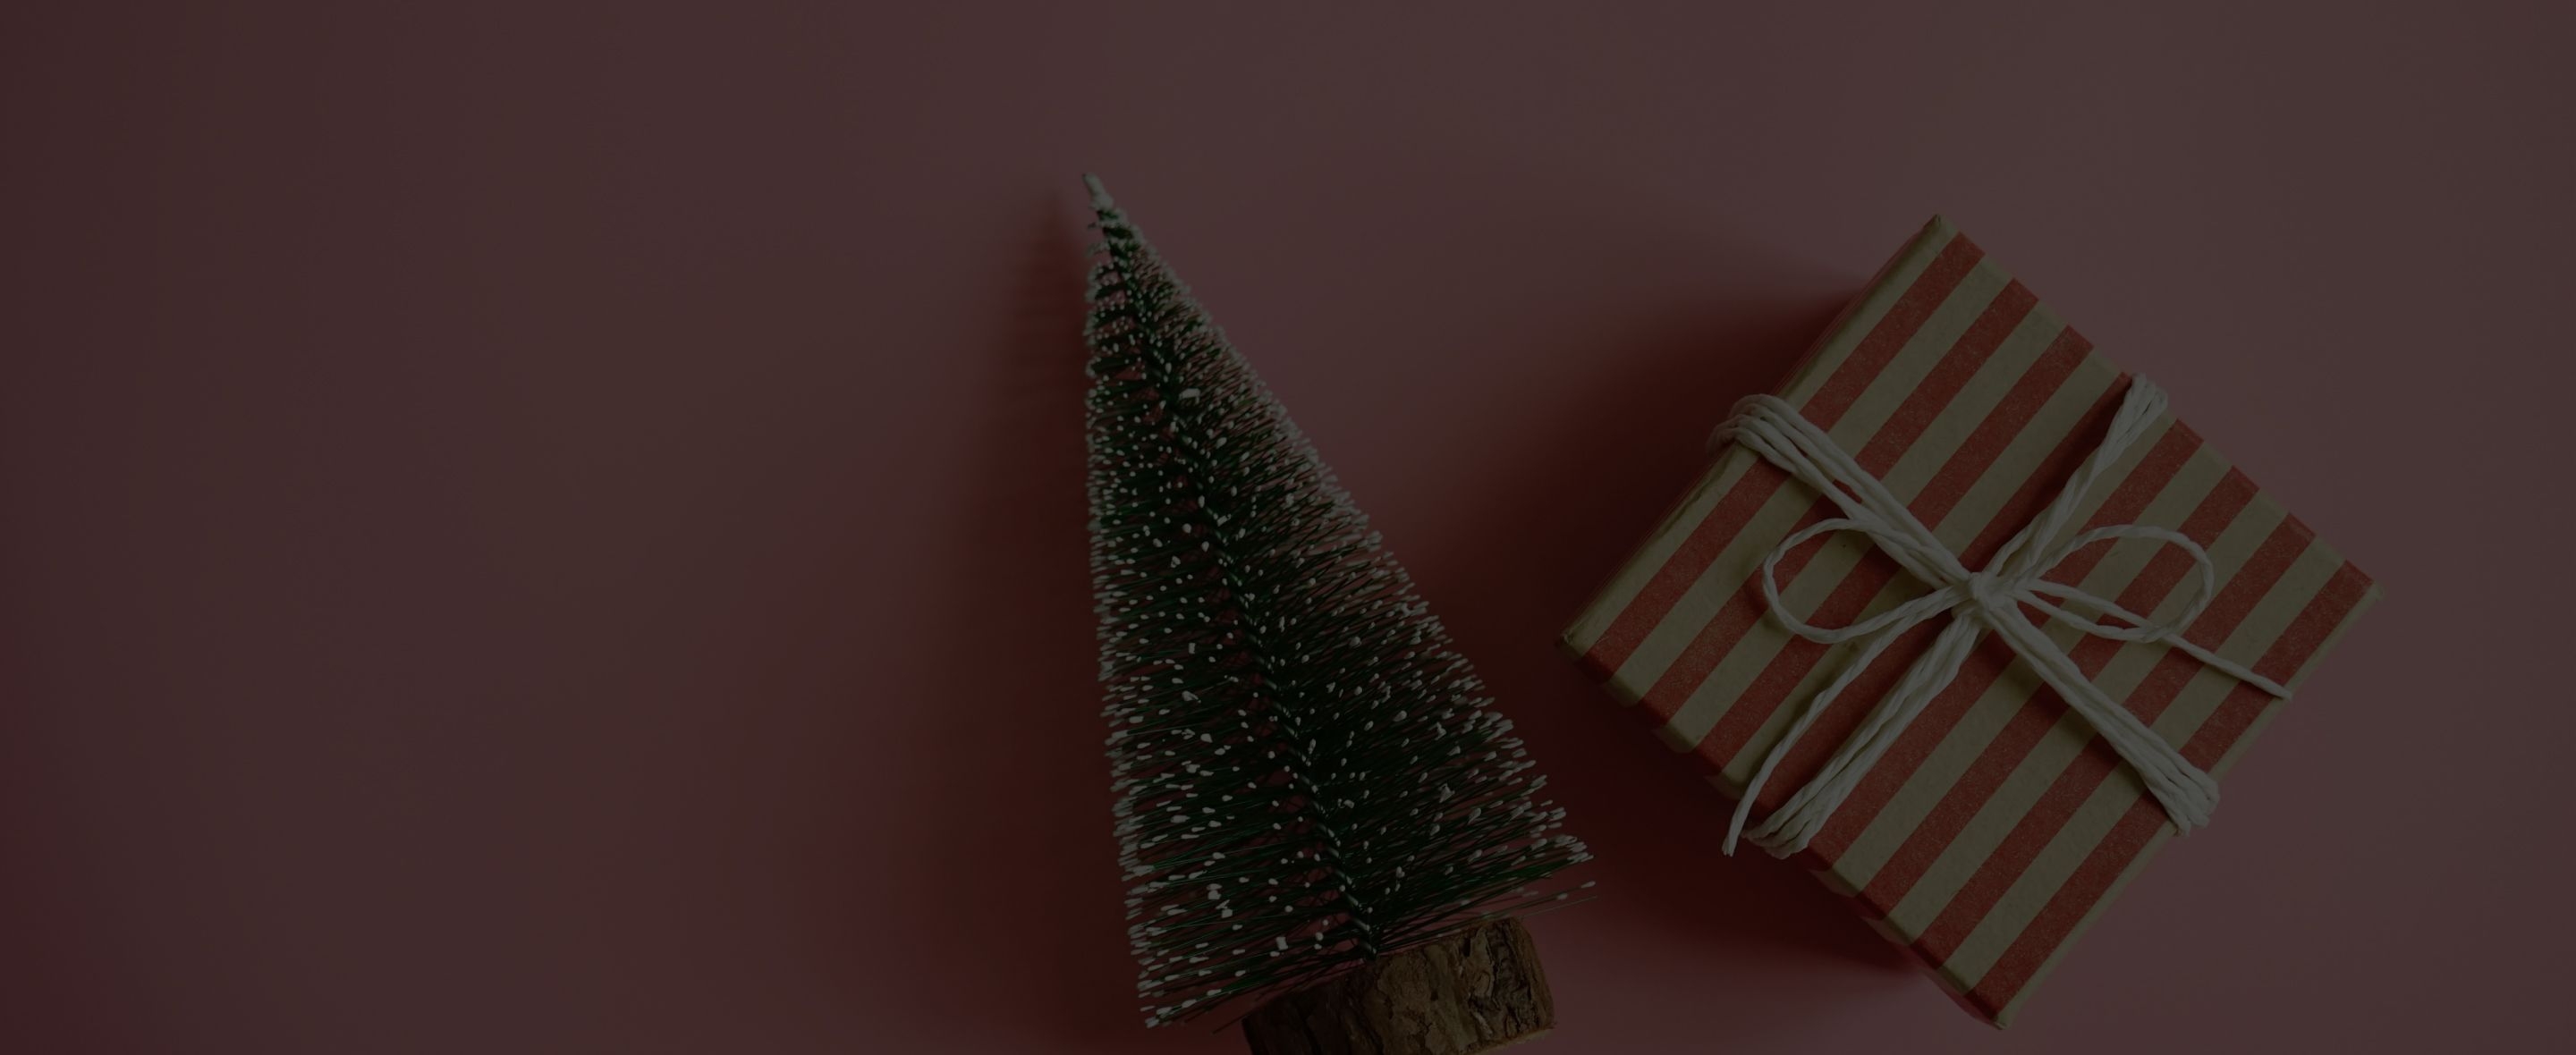 Preparing your China import Christmas campaign - Header.jpg